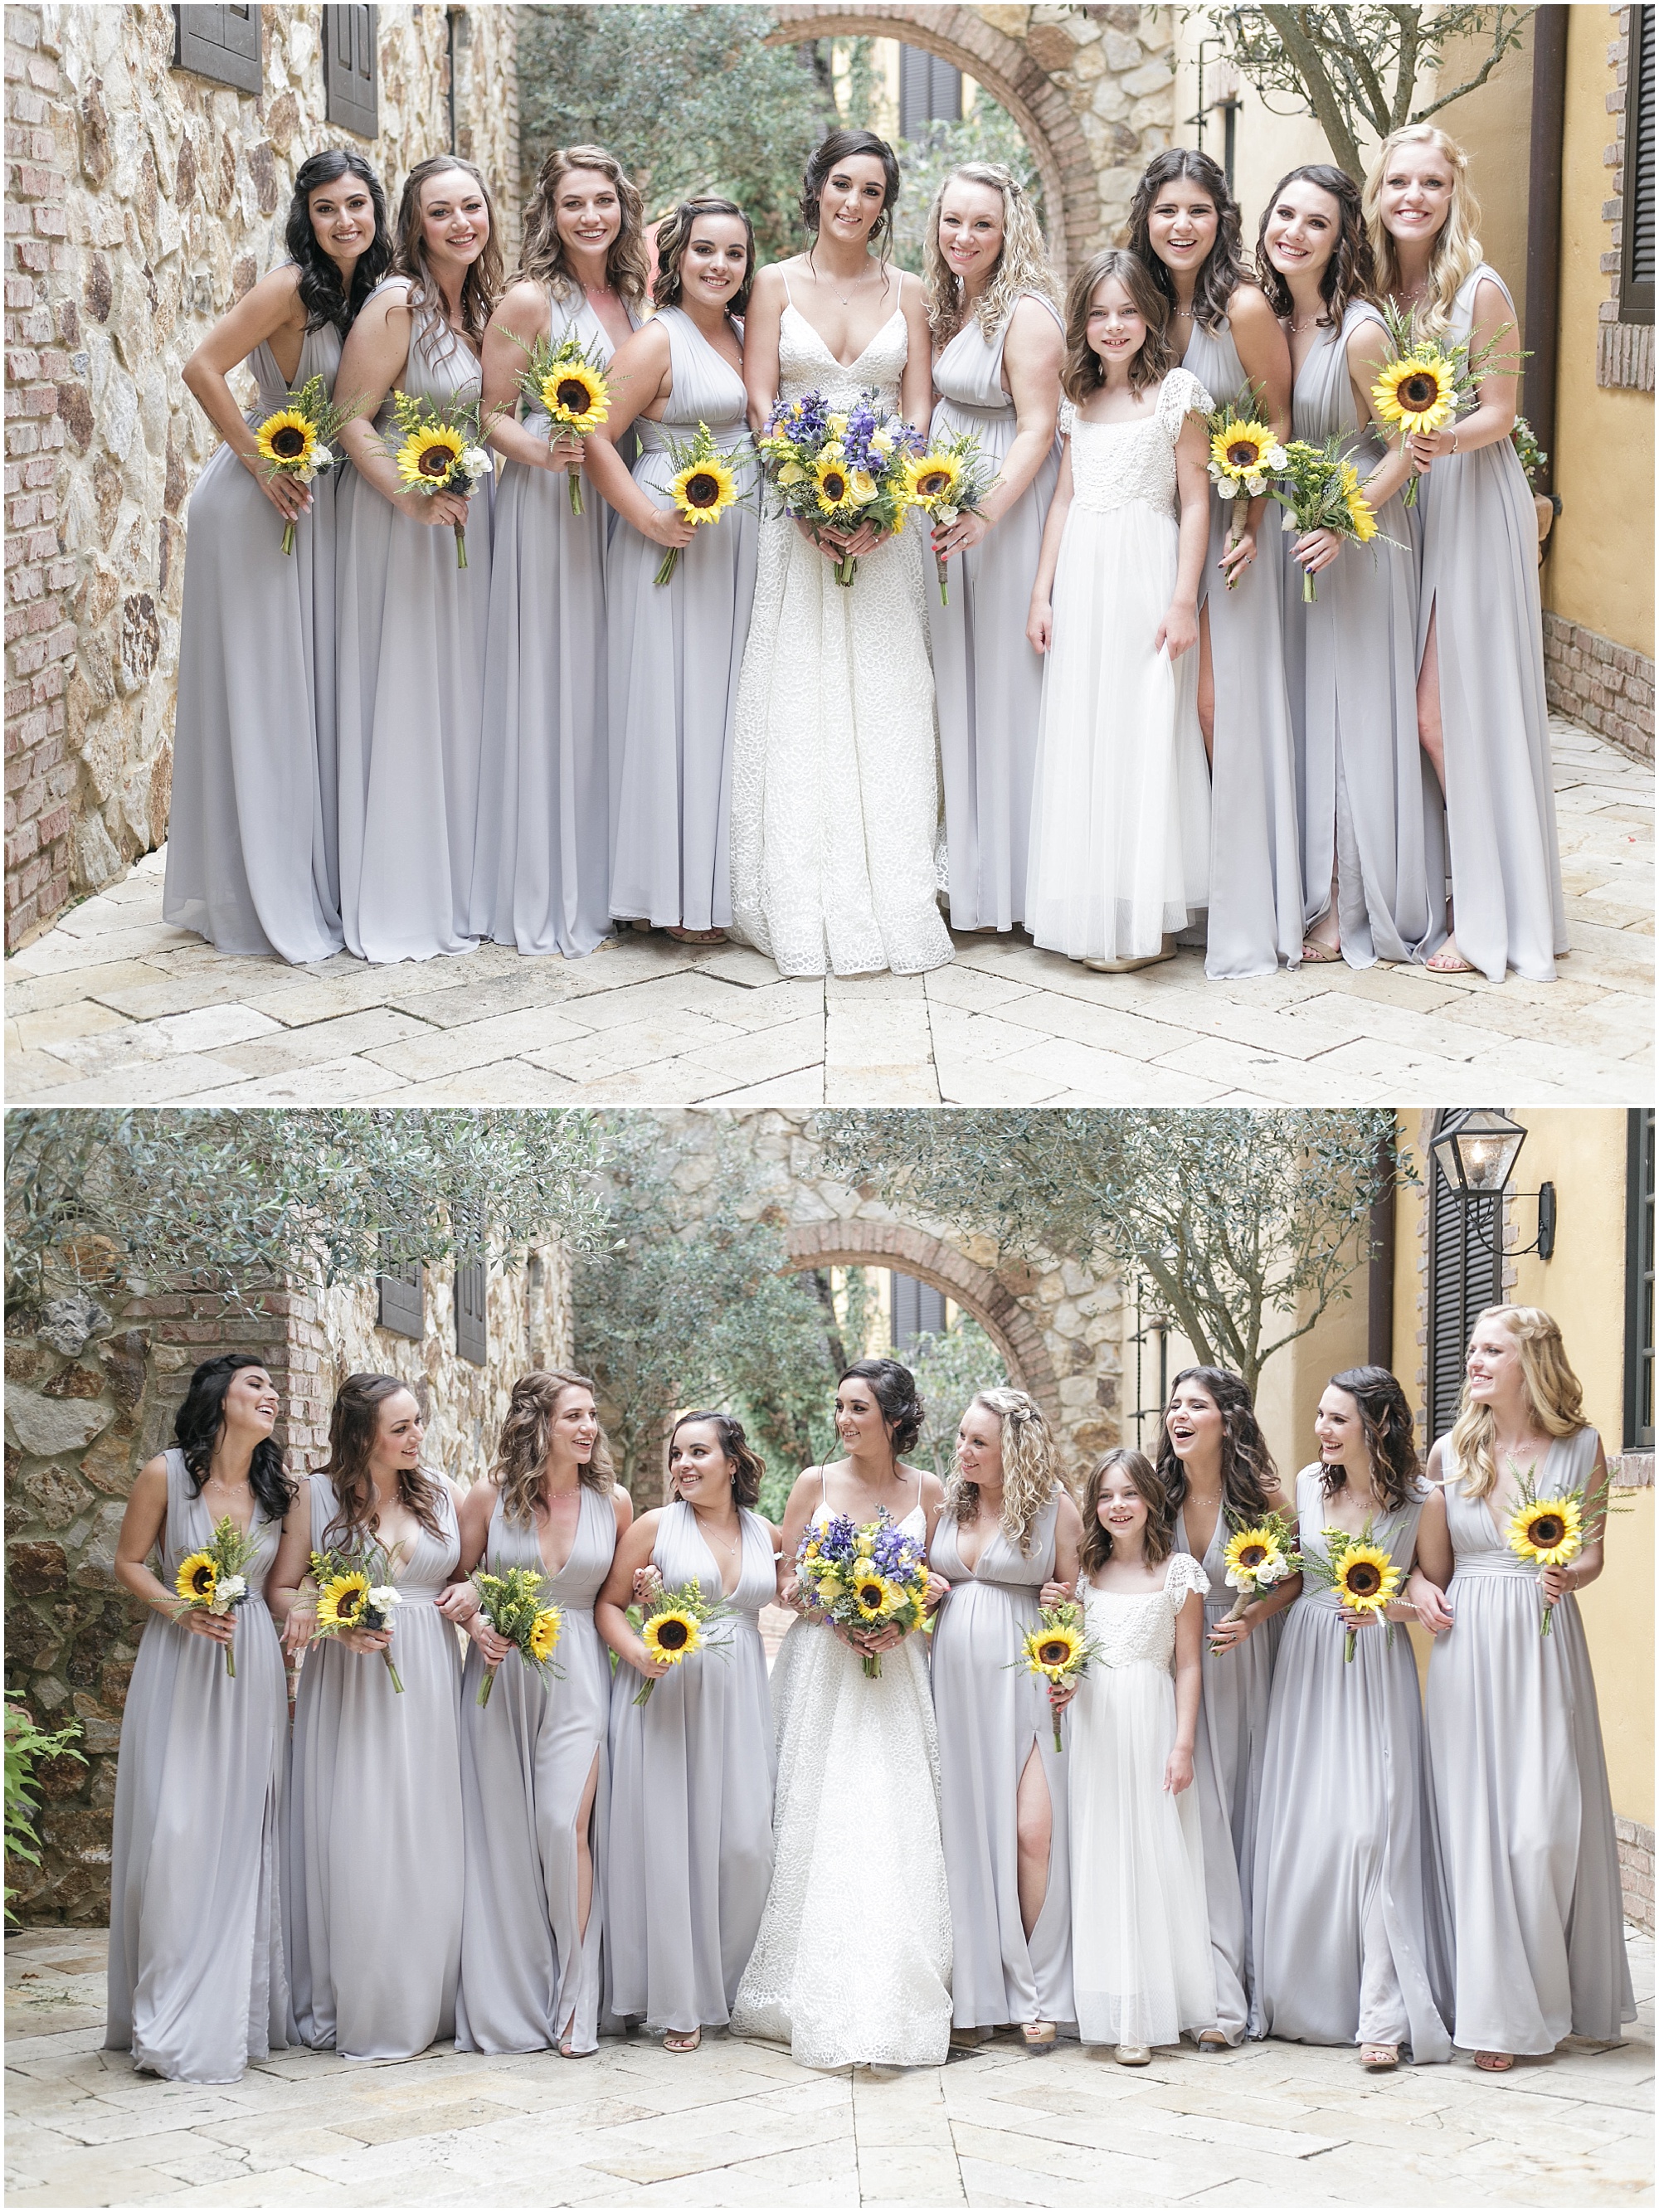 Bride standing with her bridesmaids holding sunflowers. 